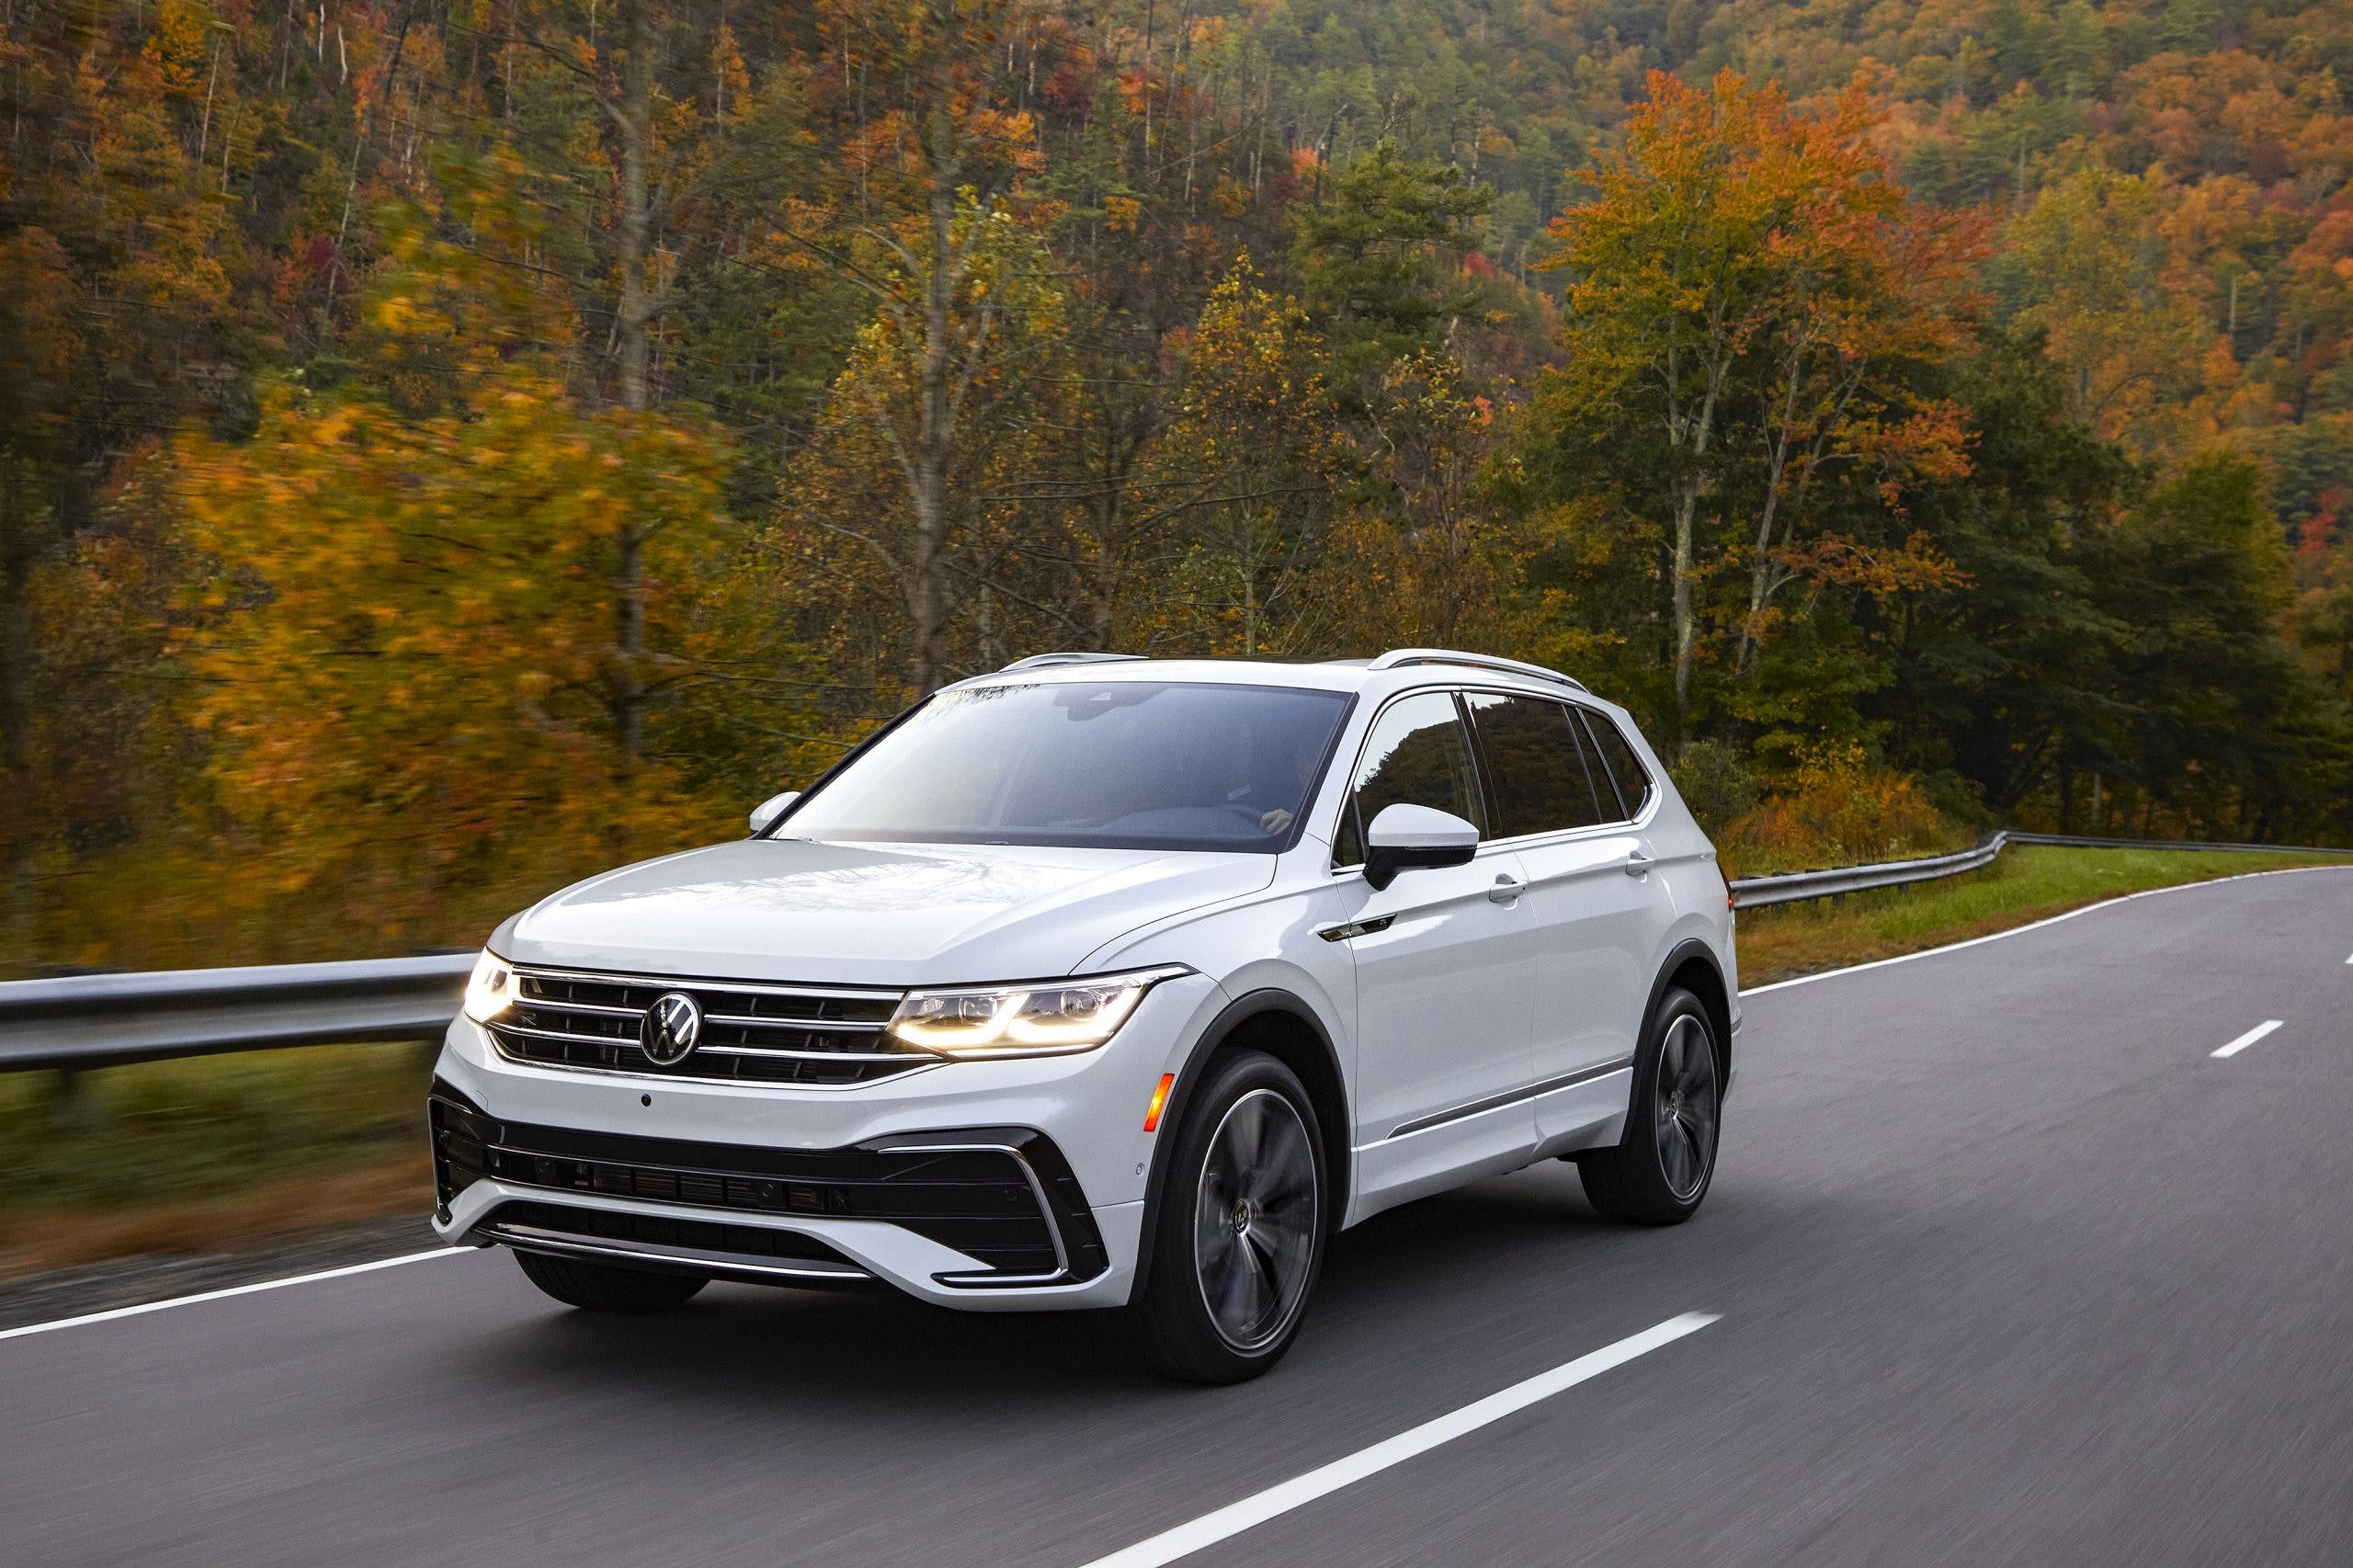 Test Drive: 2022 Volkswagen Tiguan SEL R-Line Review - CARFAX